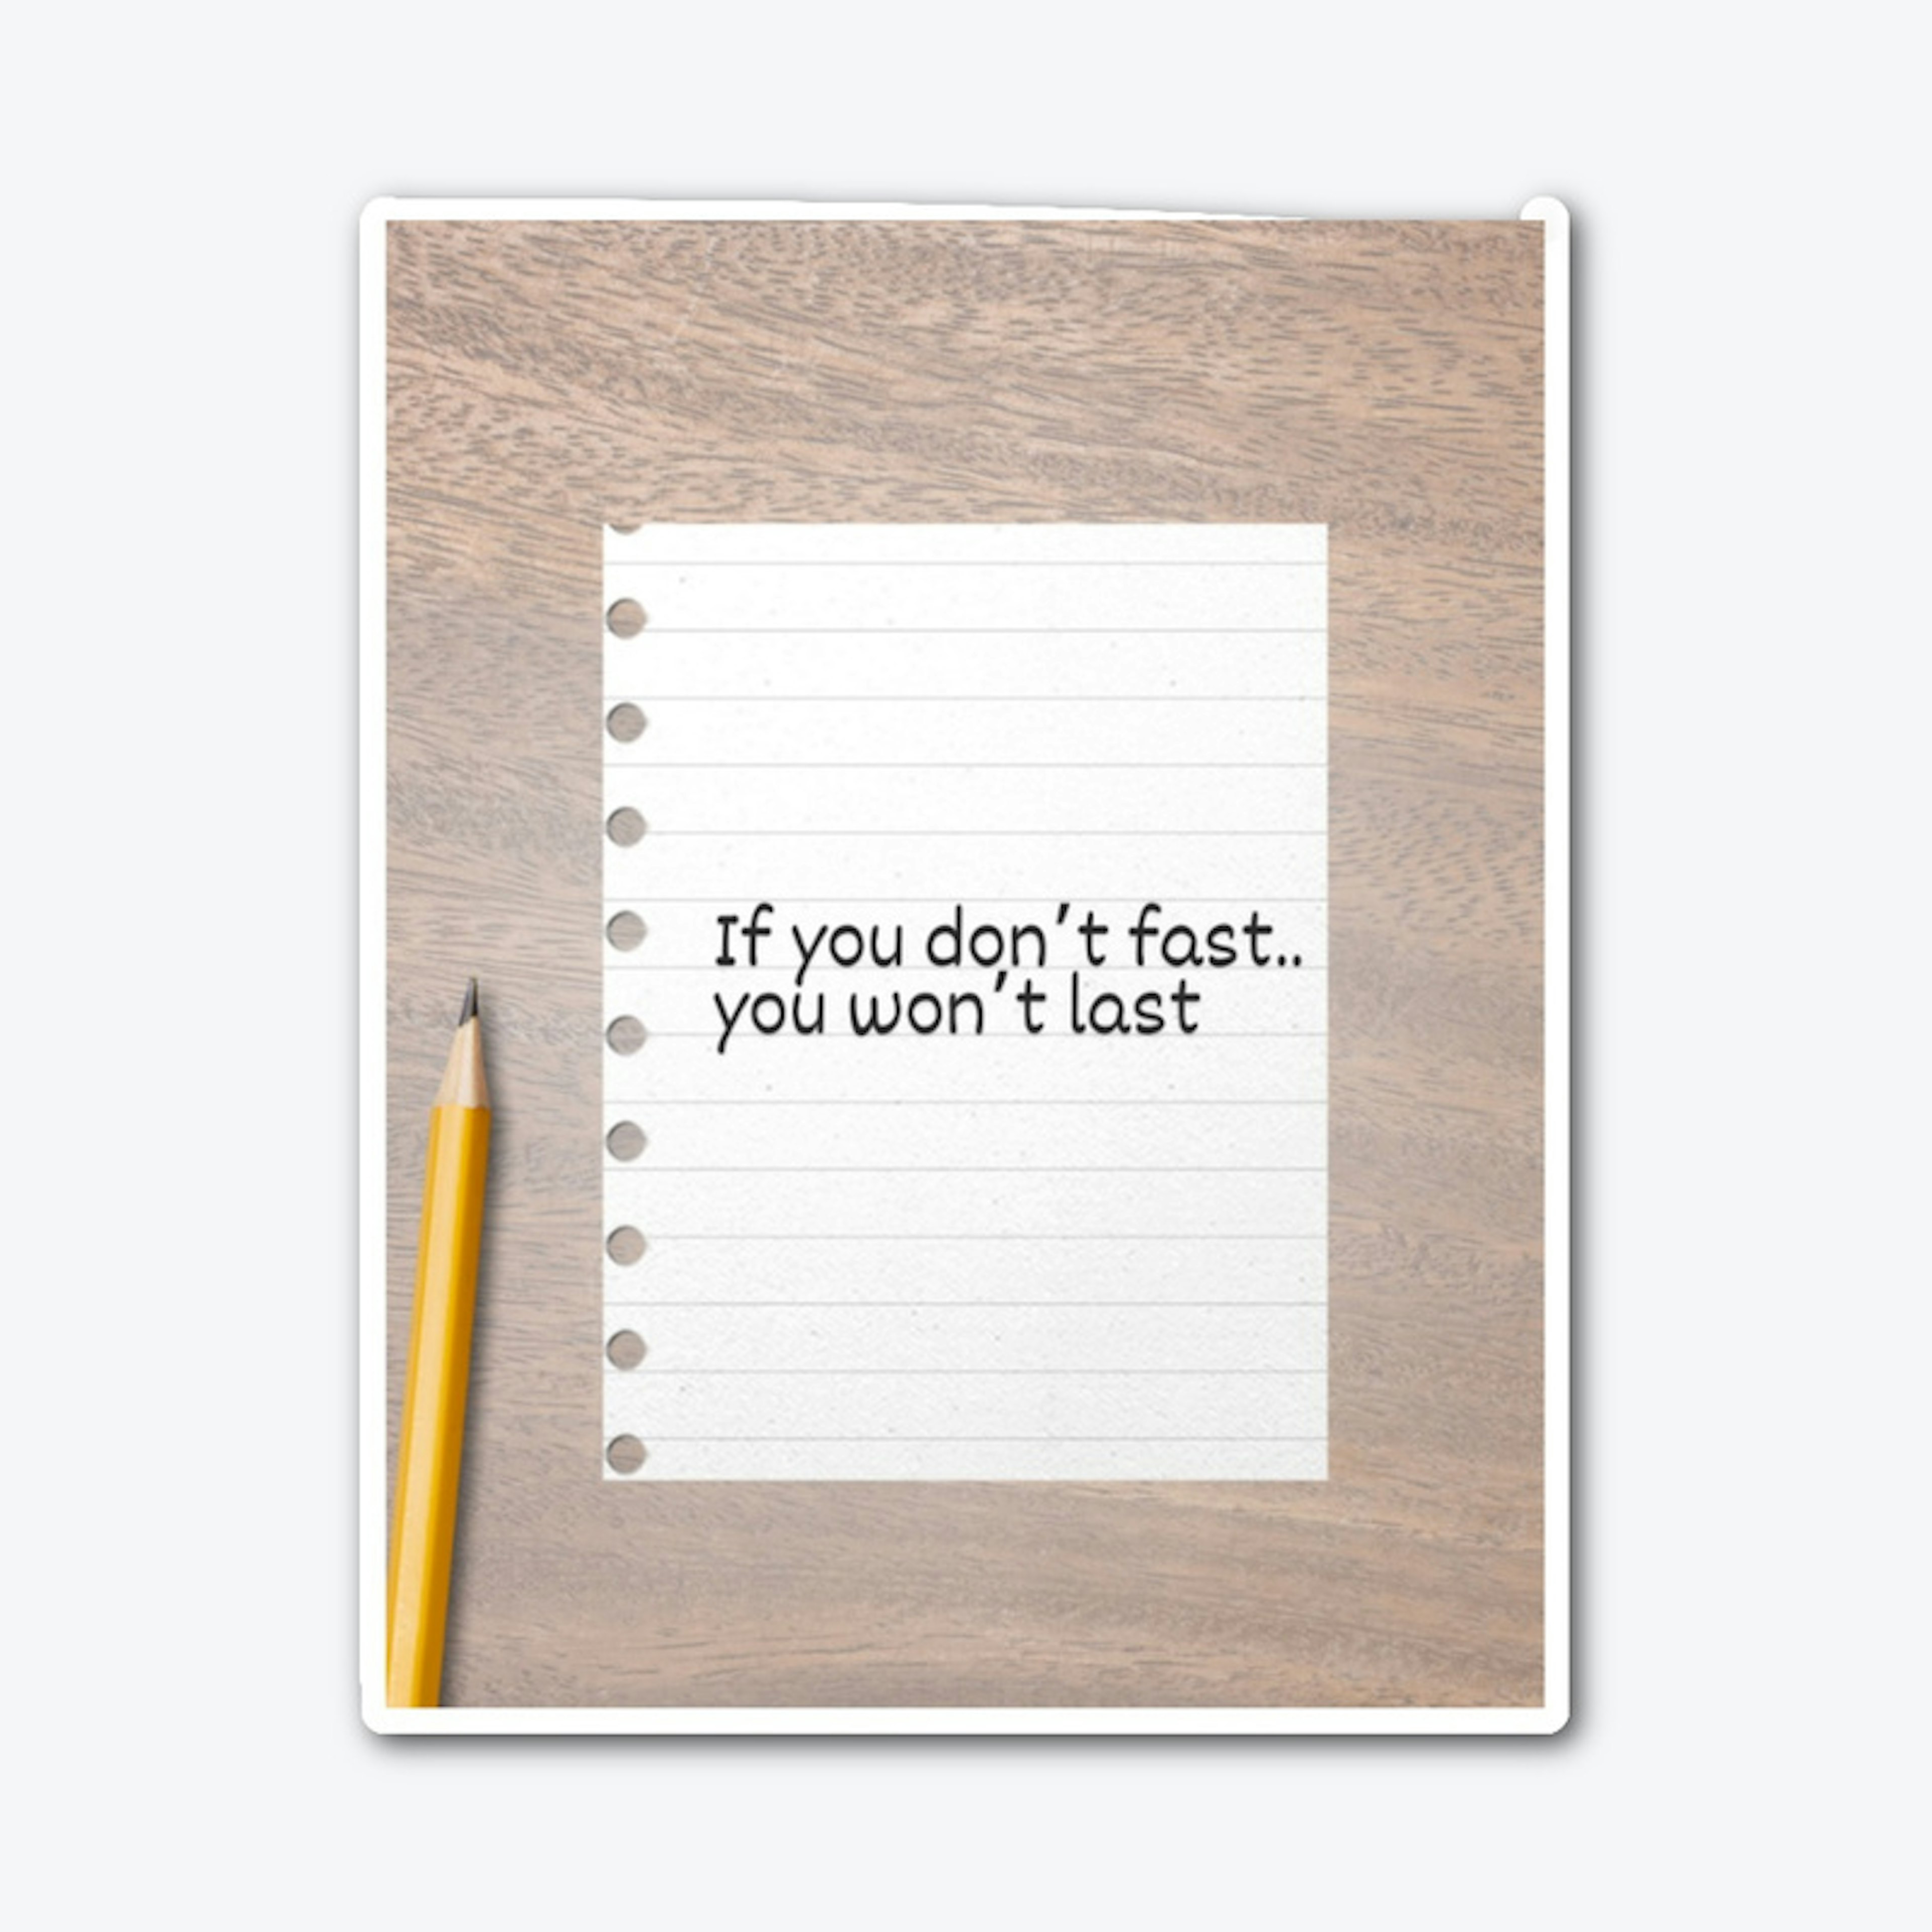 If You Don"t Fast You Won't Last